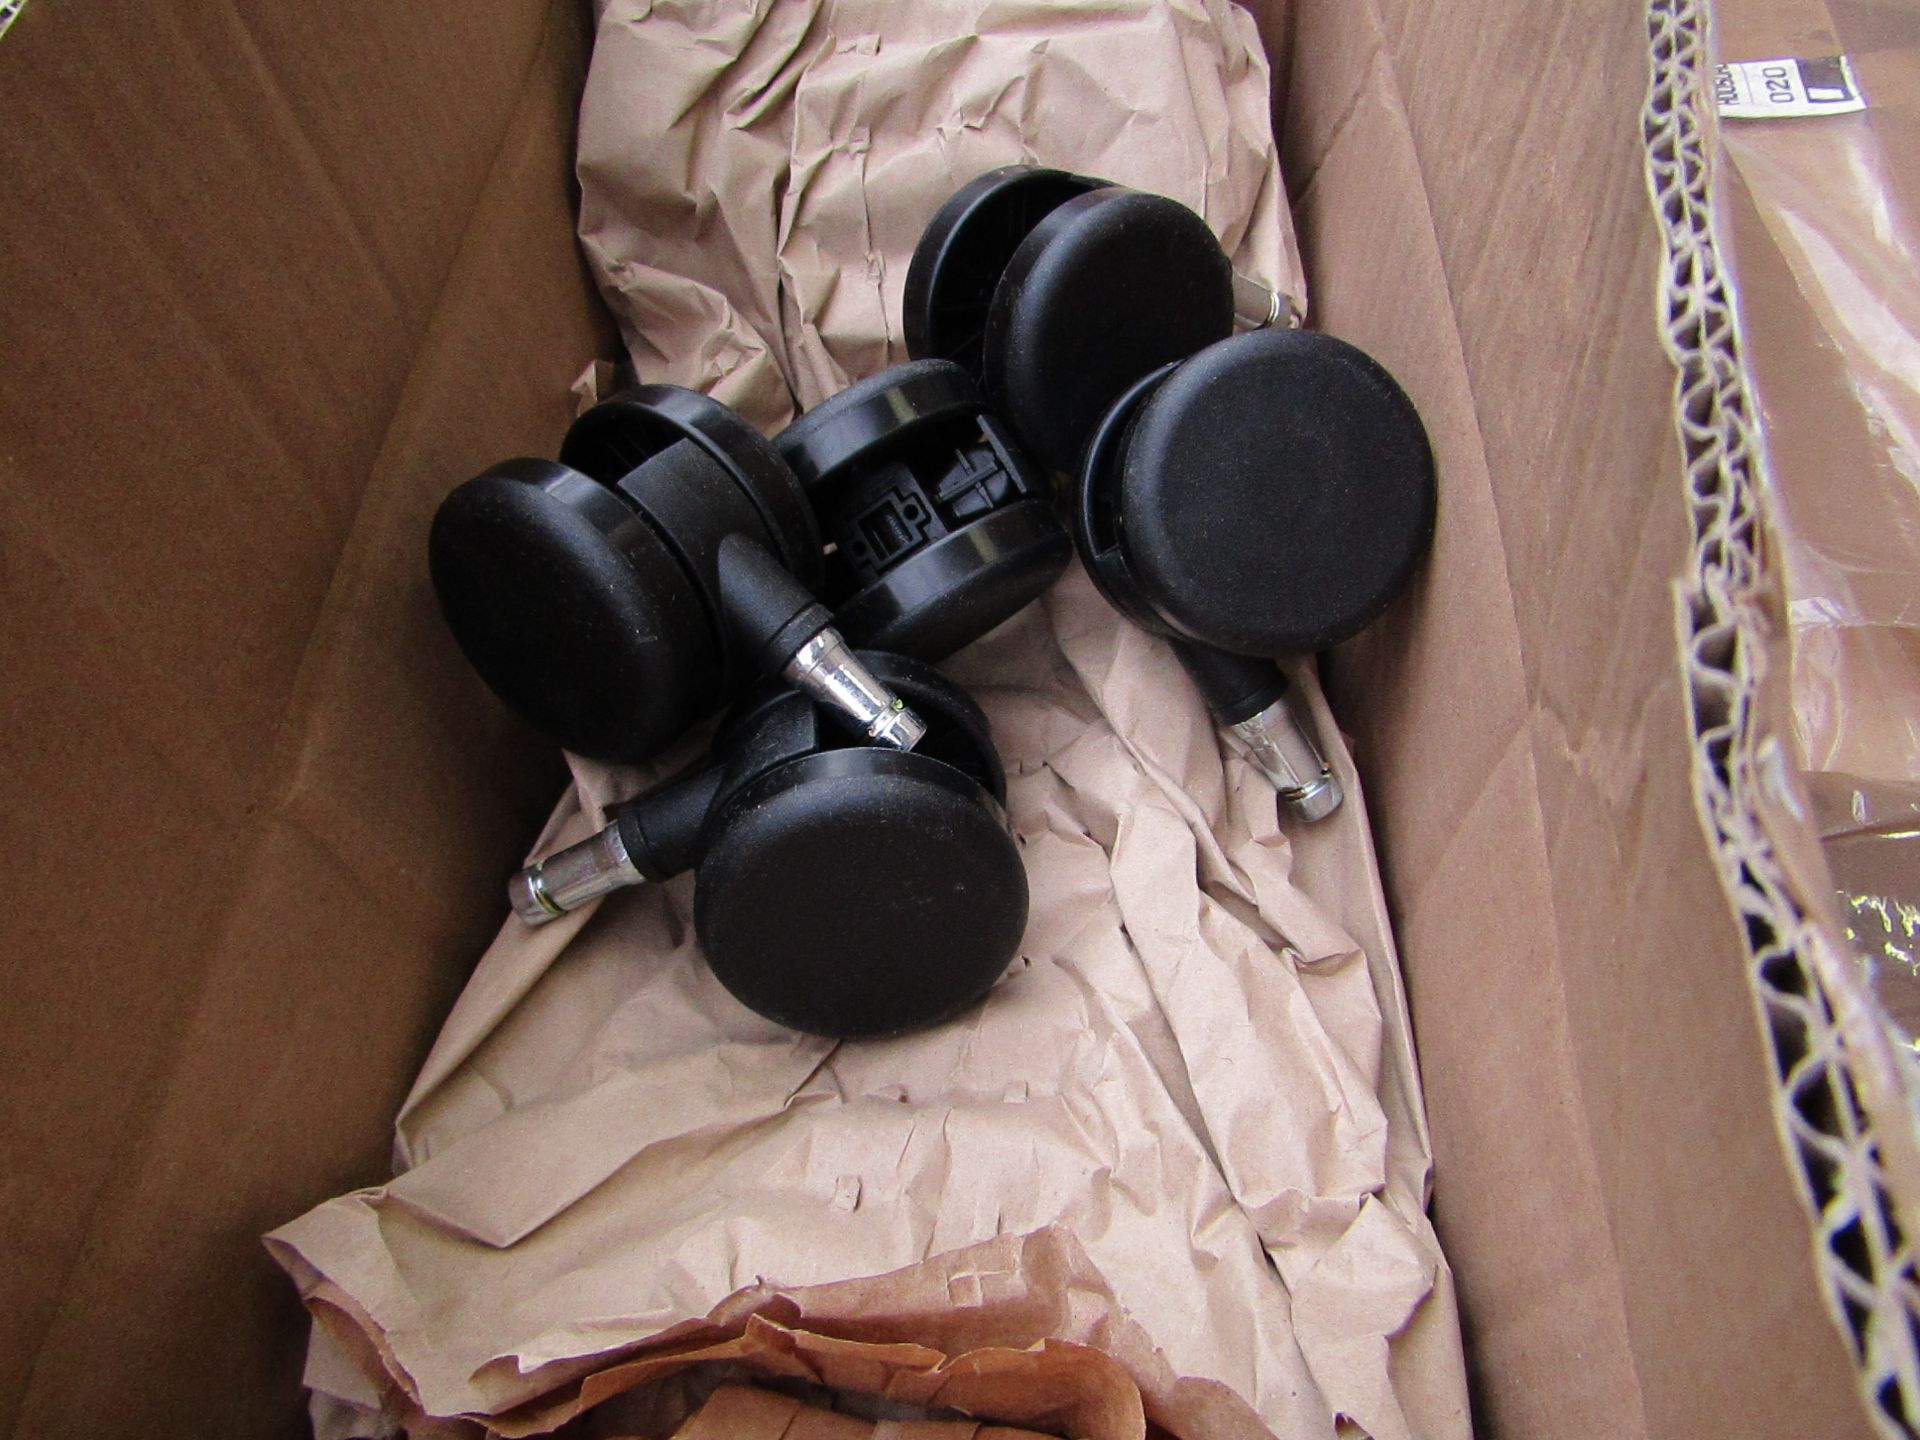 Box of 5x black soft floor casters for office chairs, new